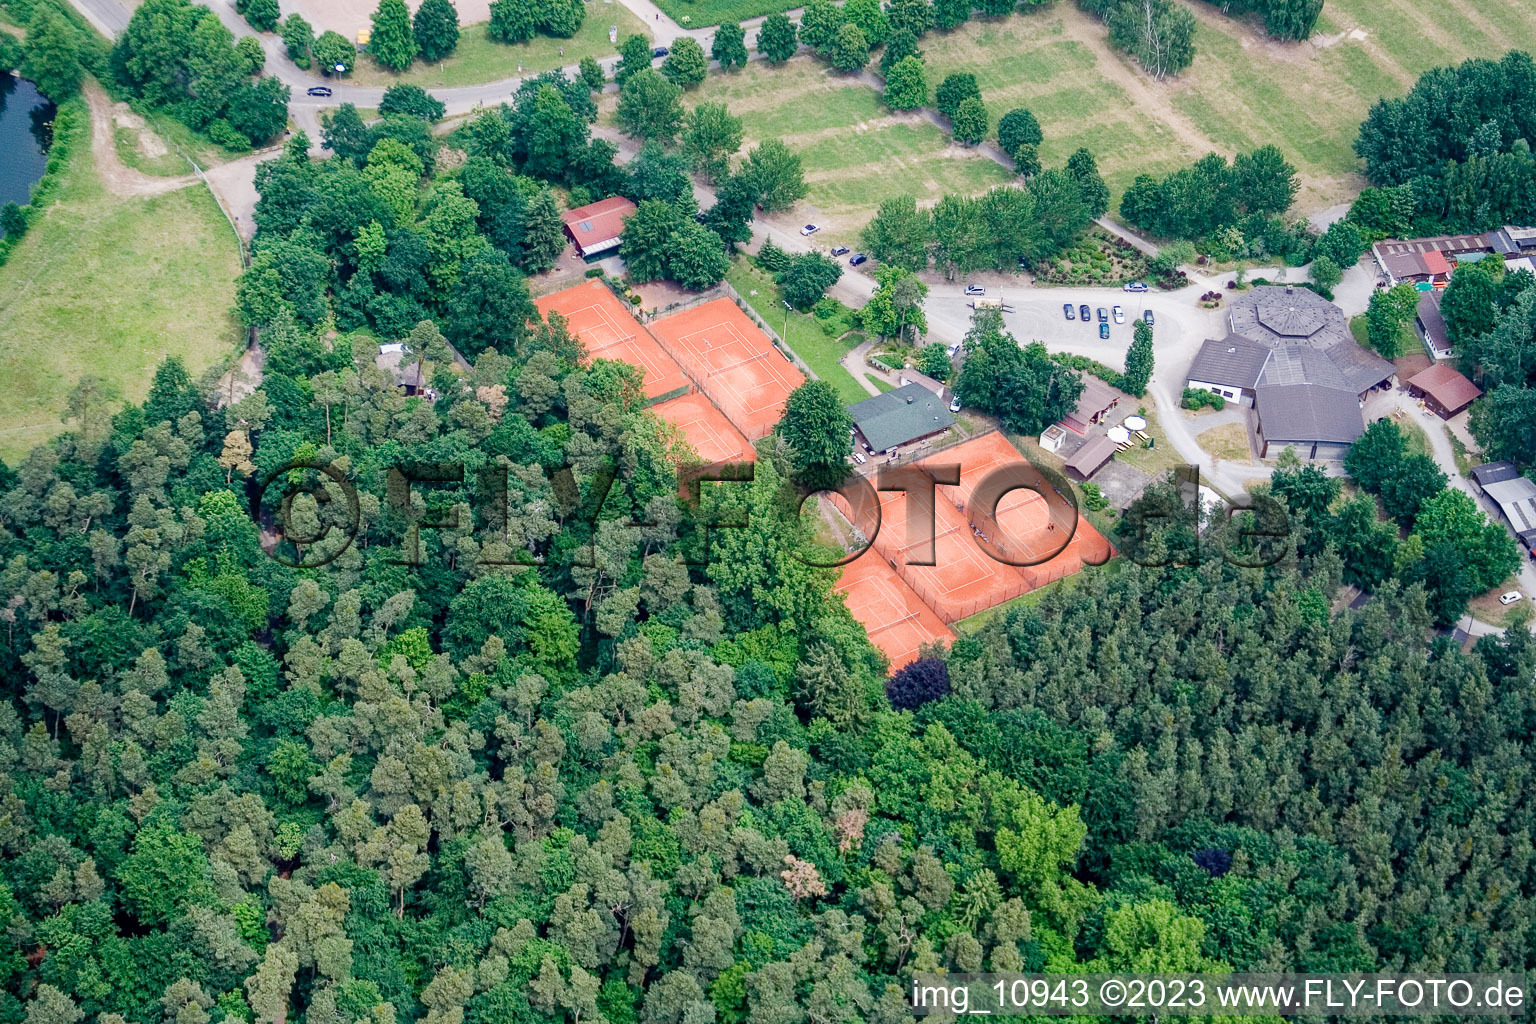 Oblique view of Tennis club in Rülzheim in the state Rhineland-Palatinate, Germany